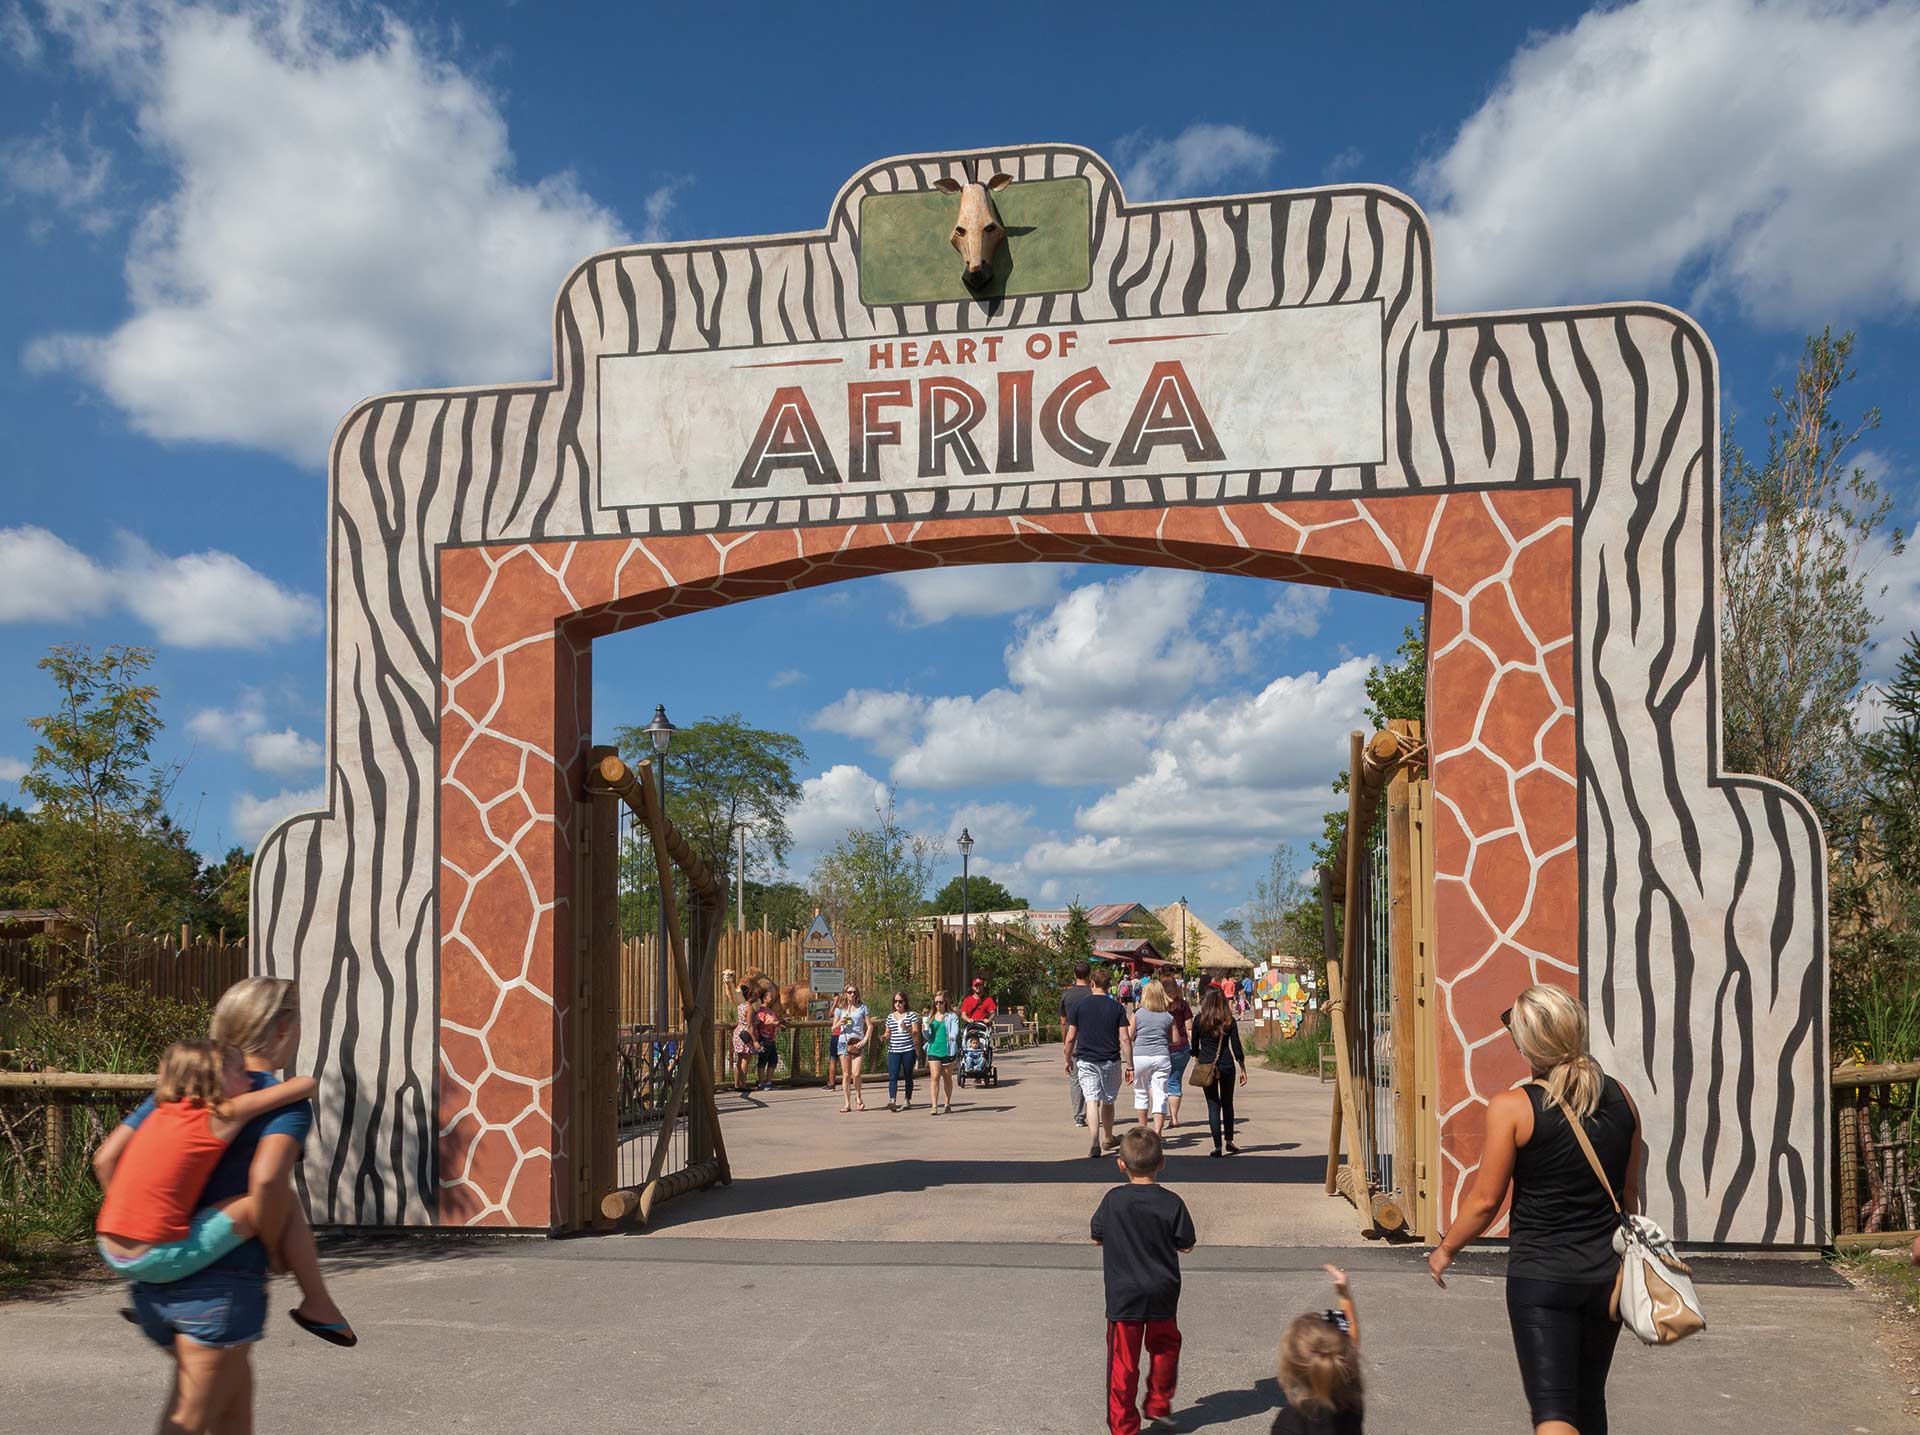 Entryway to the Heart of Africa